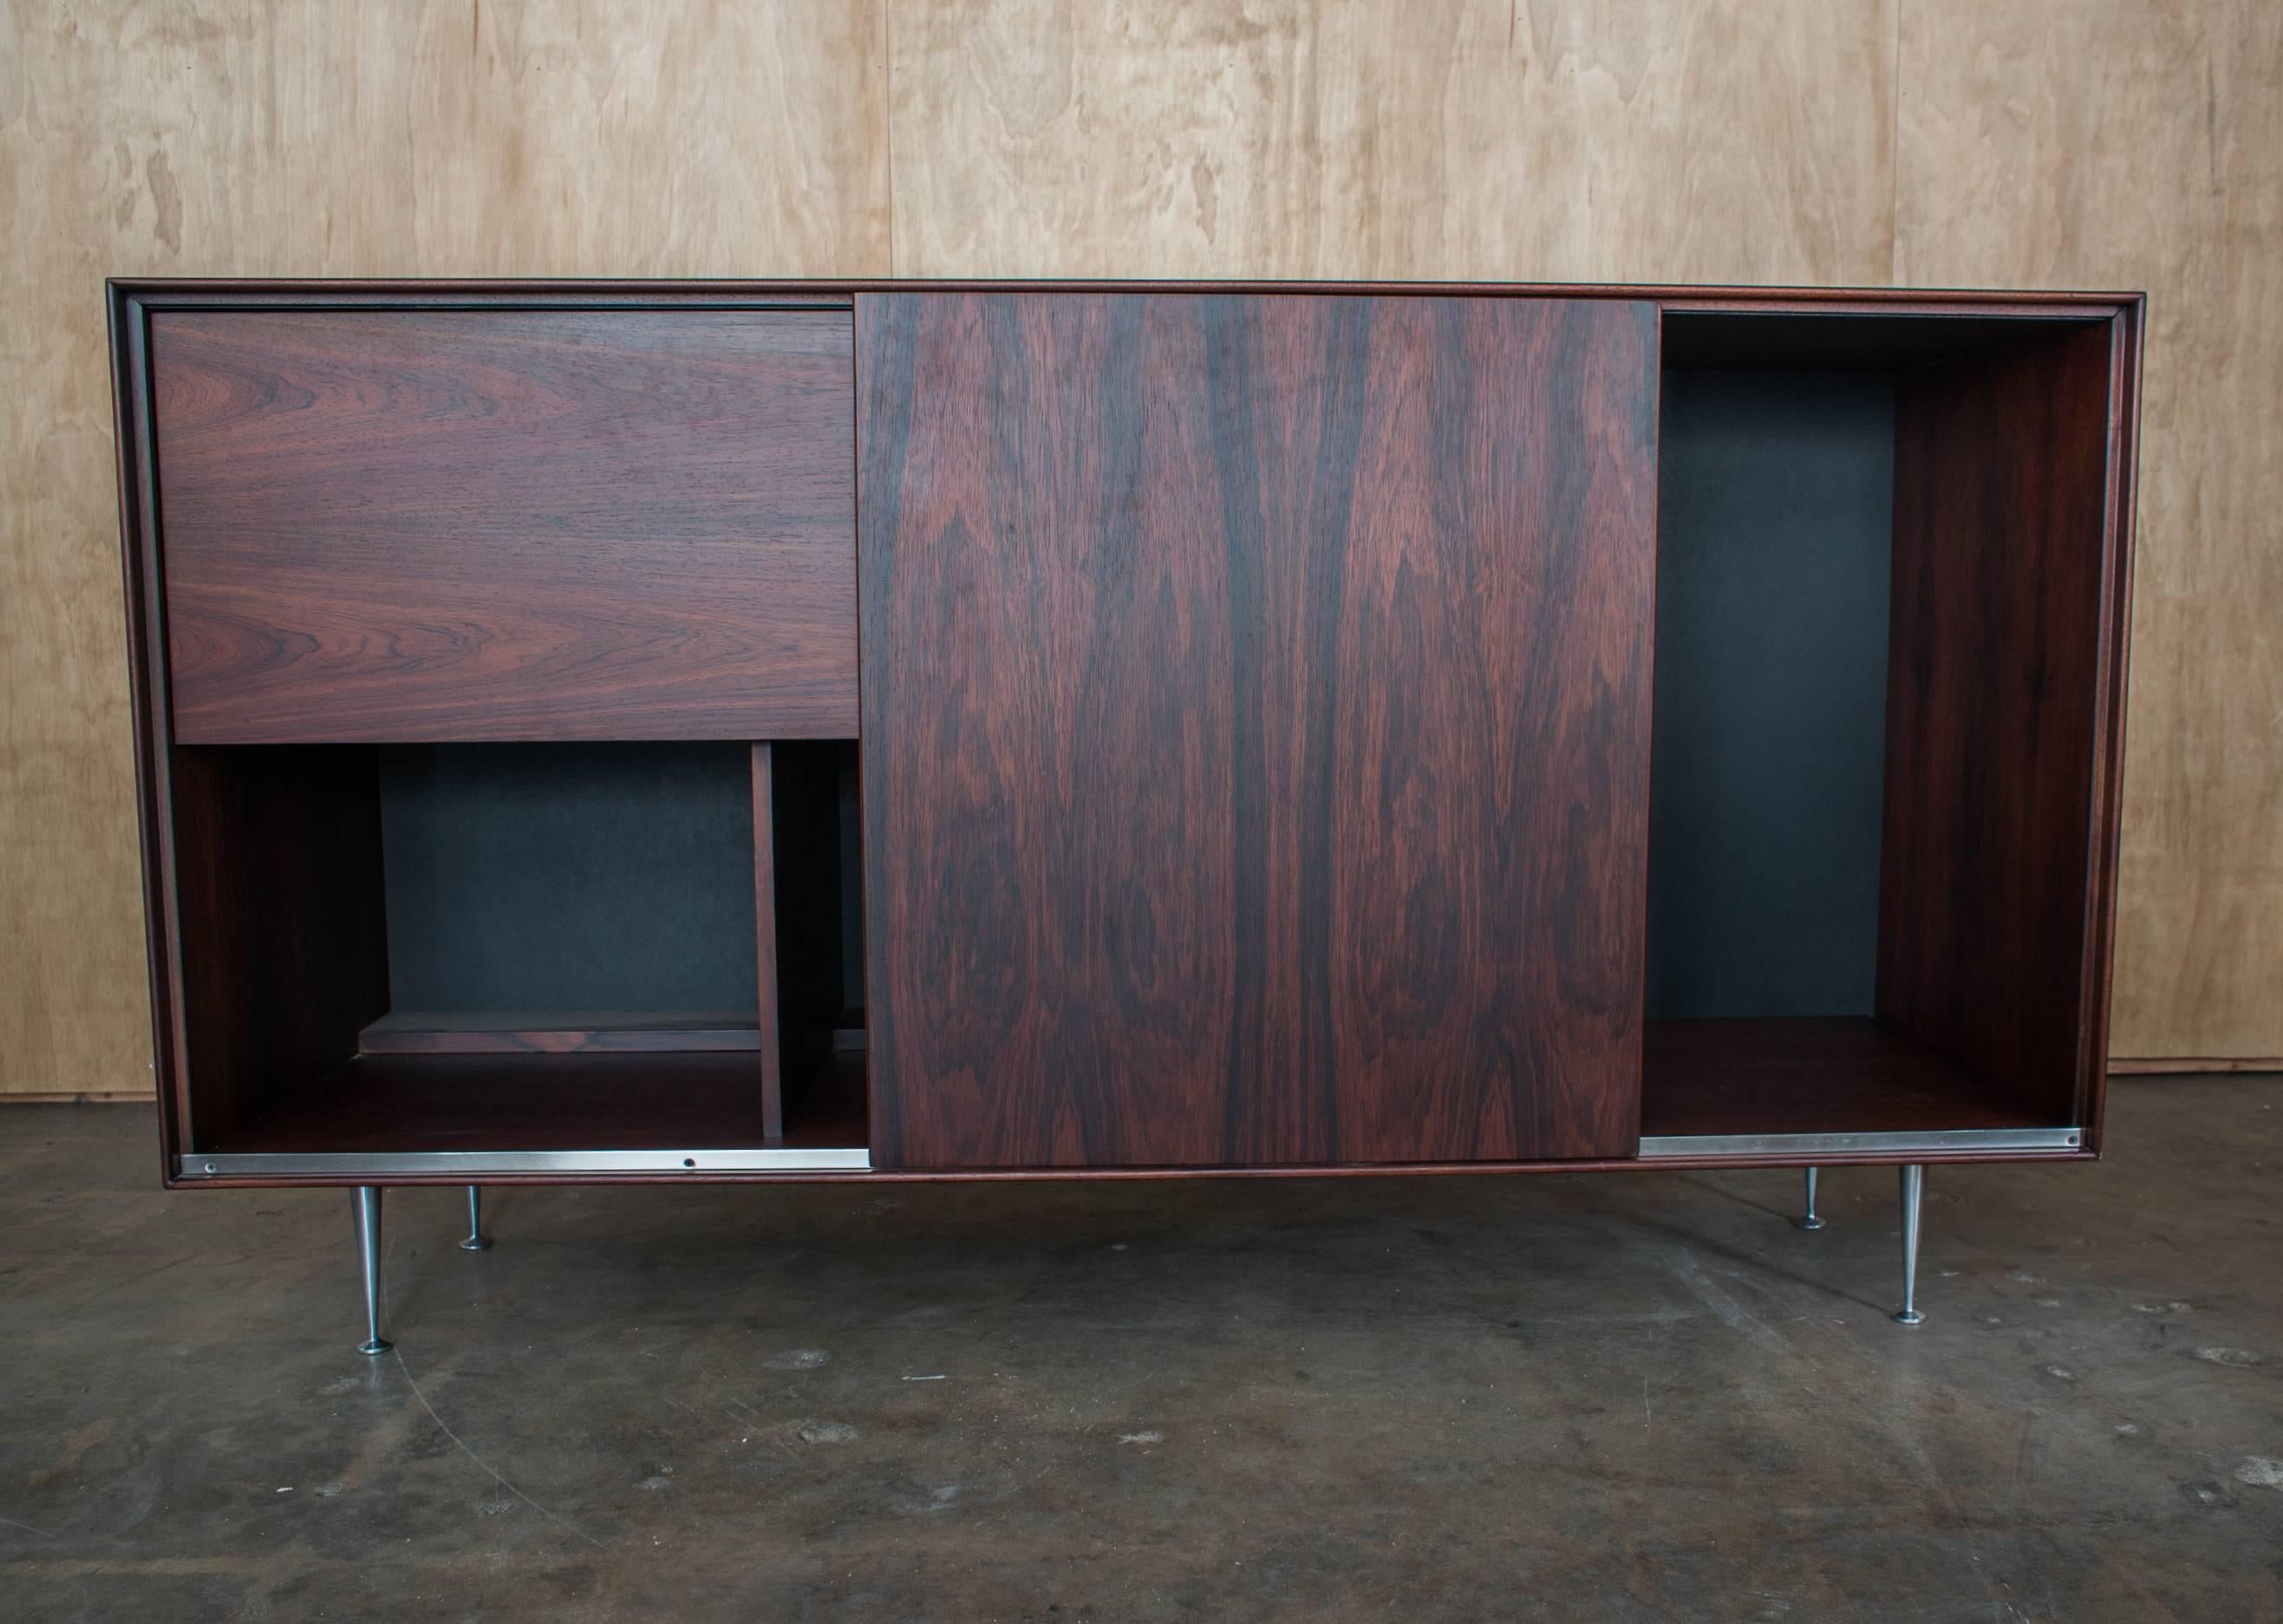 Late 1960s Herman Miller rosewood thin edge sideboard designed by George Nelson & Assoc. Sliding panel opens to reveal storage with drop down door reveling dry bar bottle and glassware storage. Aluminum legs.